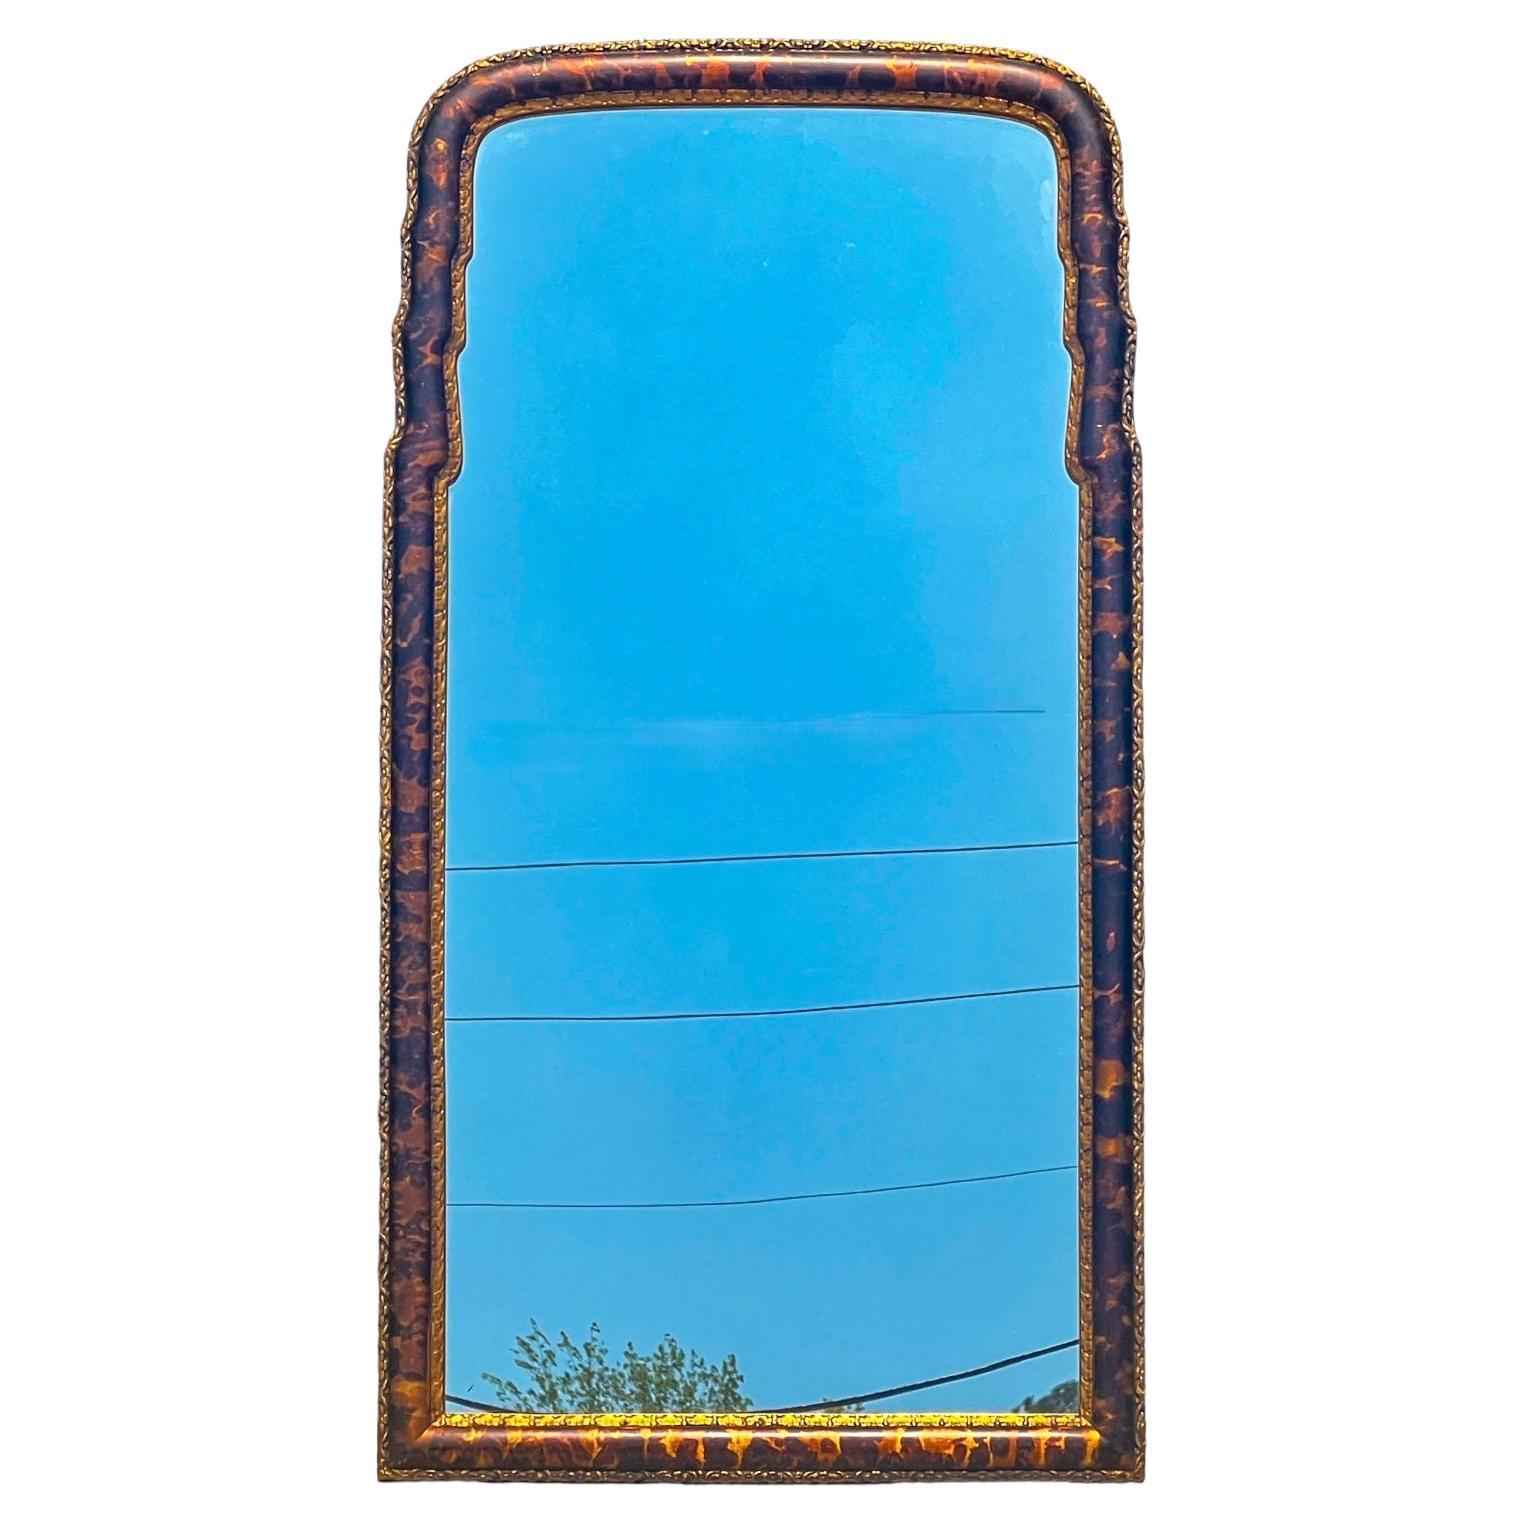 This is a regency style mirror with a faux tortoise and carved gilt finish. It is attributed to LaBarge. The mirror is both composition and wood. It is unmarked and in very good condition.